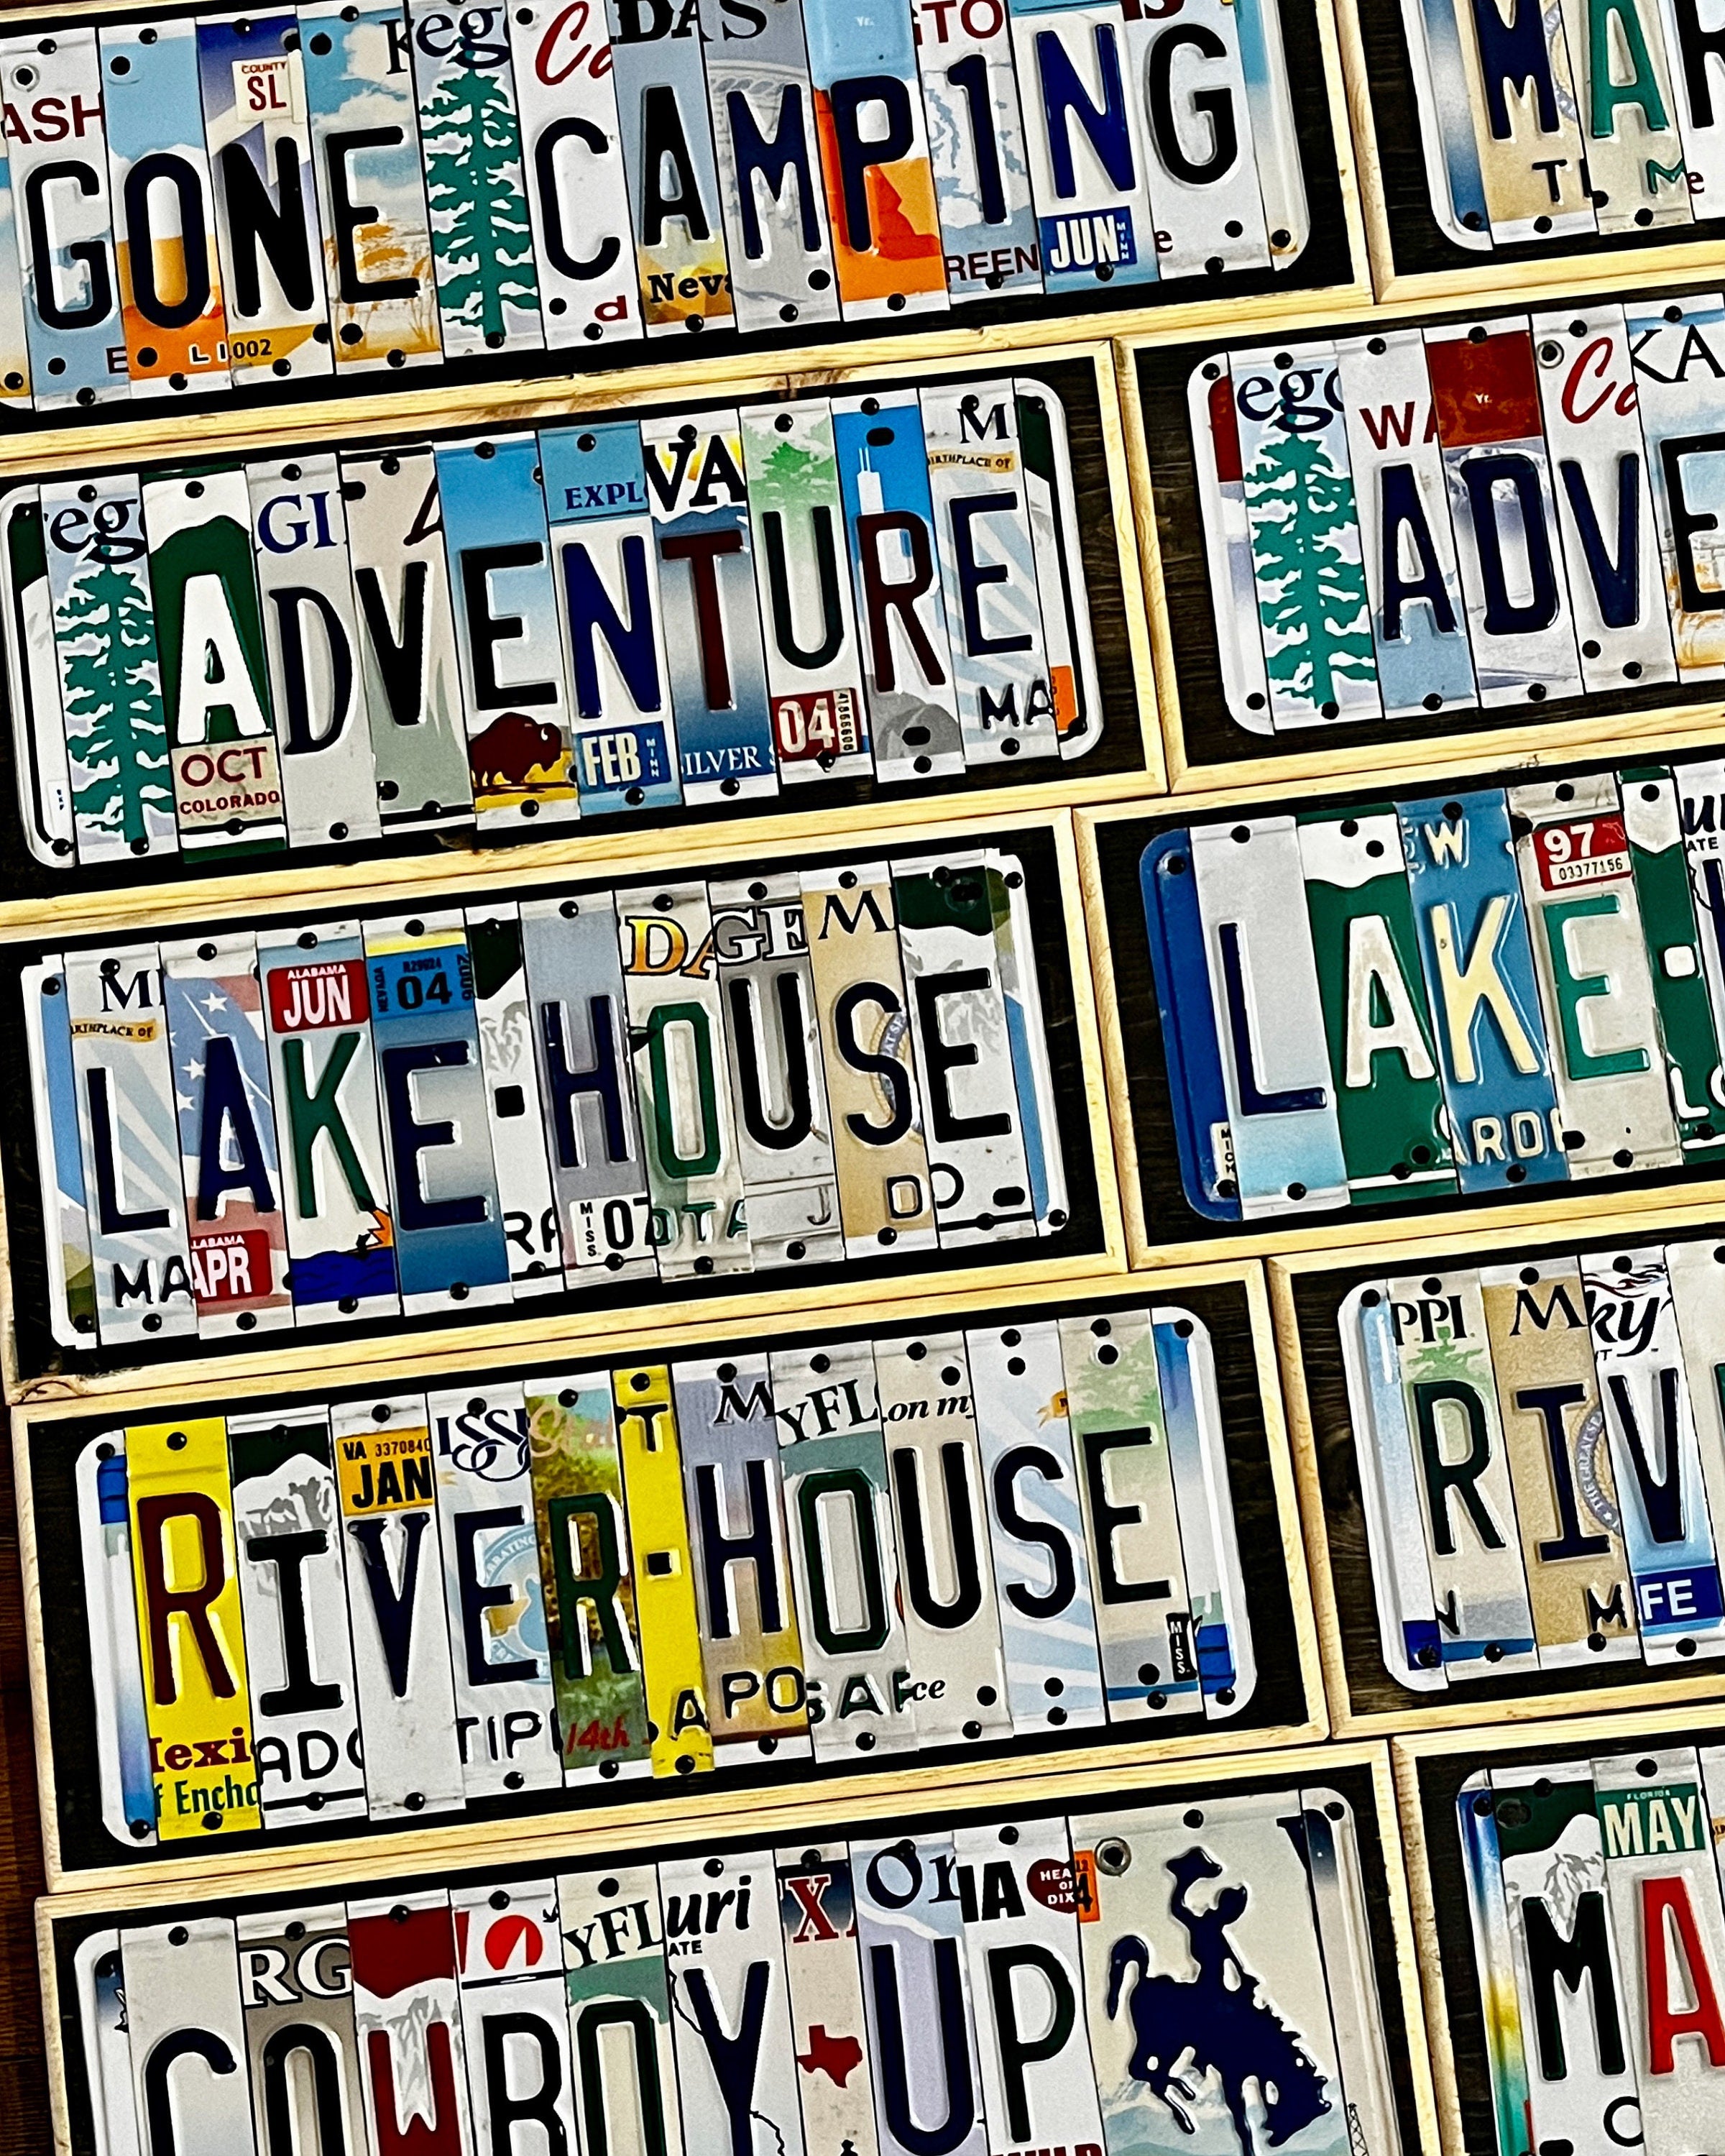 Life's A Beach - Custom License Plate Sign made with repurposed License Plates